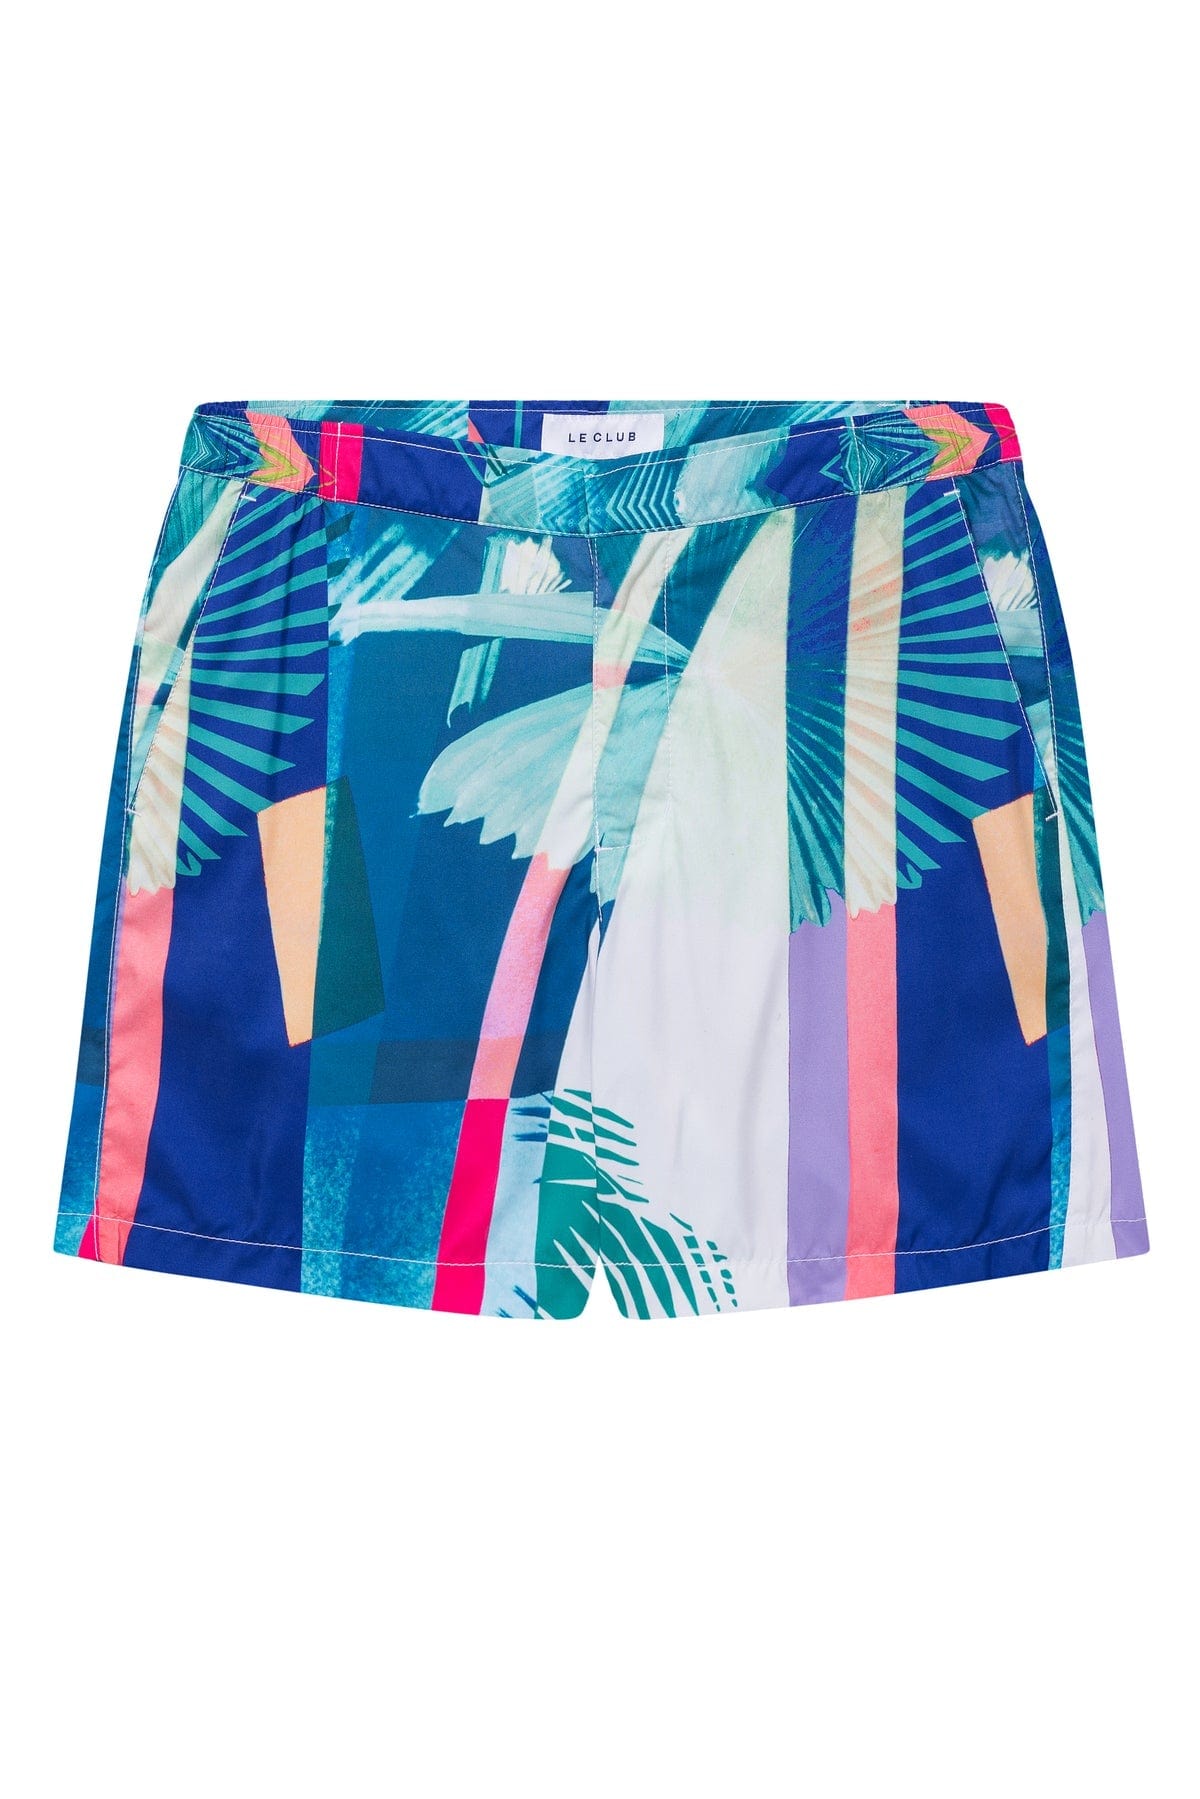 Load image into Gallery viewer, Le Club Apparel &amp;amp; Accessories &amp;gt; Clothing &amp;gt; Shorts 5.5 Inches / Small Club Men&amp;#39;s Swim Trunk Inhotim 2022 Le Club Men&amp;#39;s Swim Trunk Inhotim
